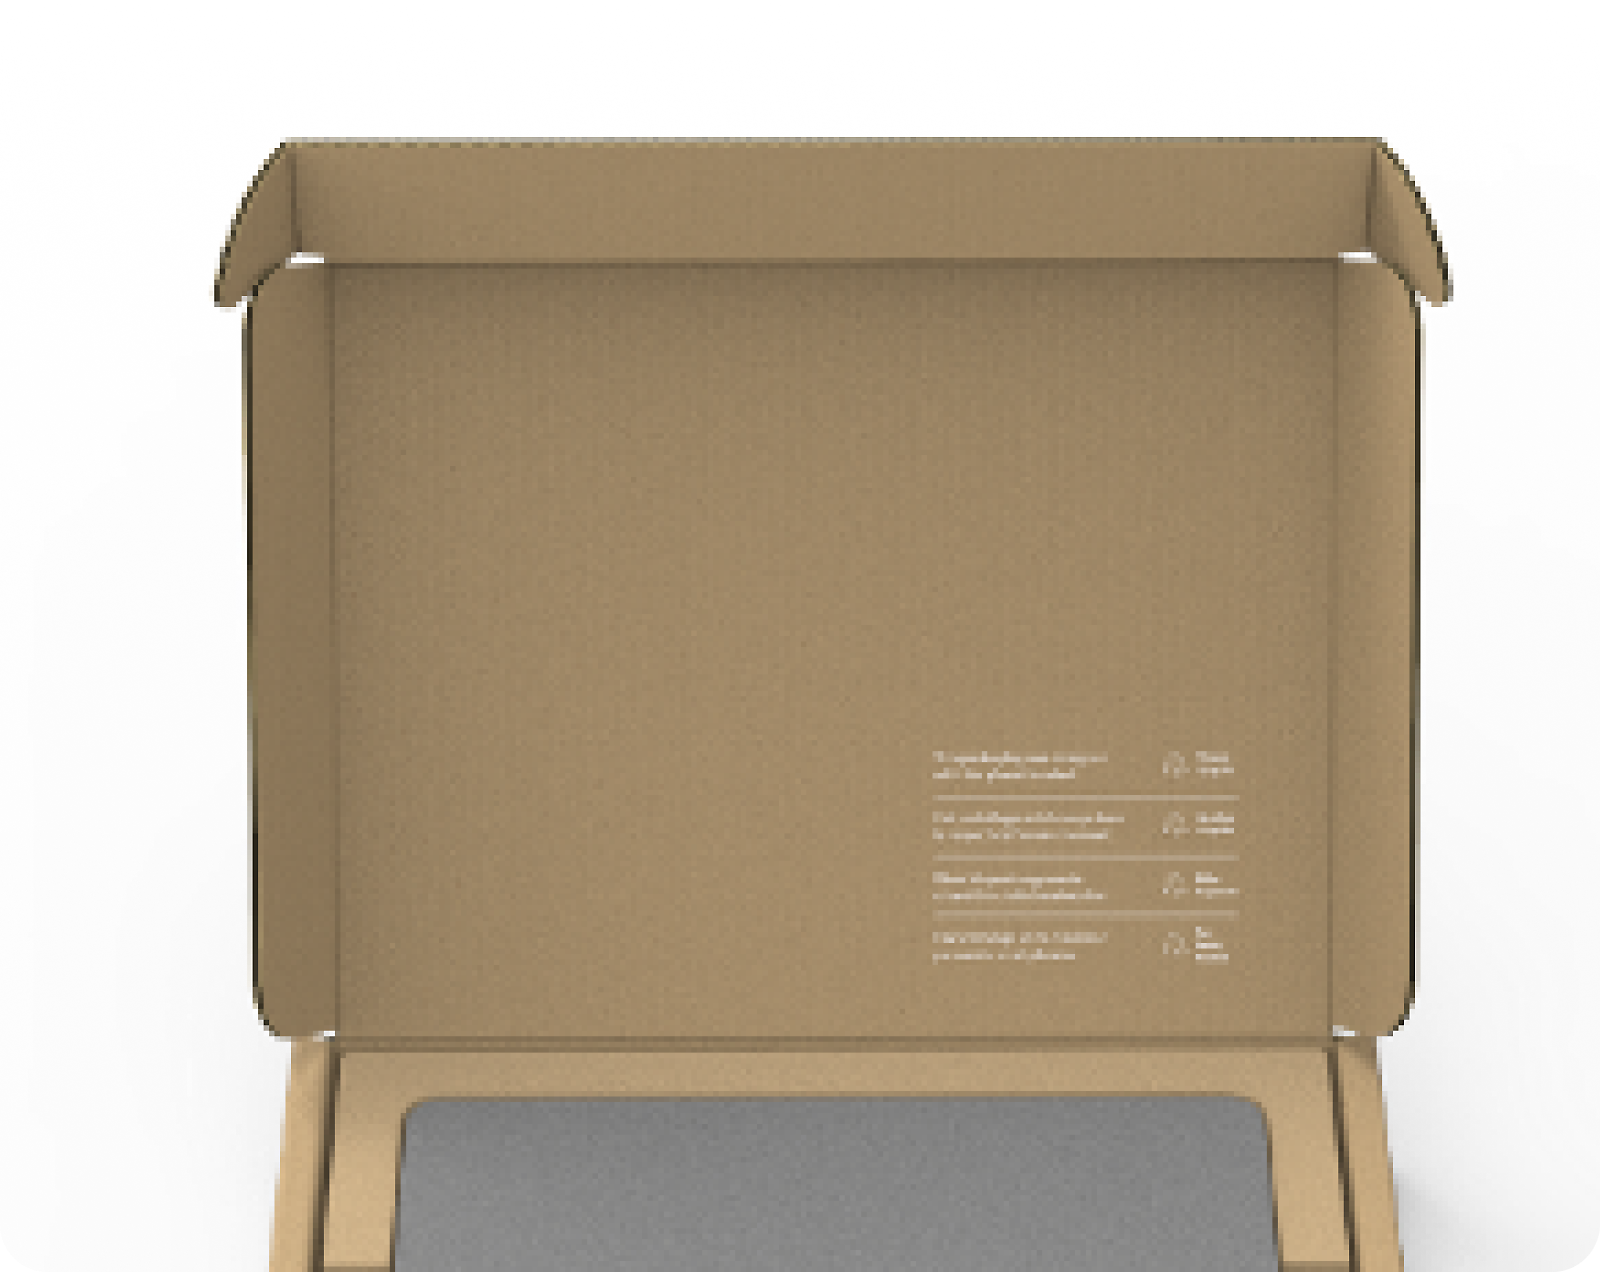 Open cardboard box with a folded flap, revealing packing material inside and a small set of instructions printed